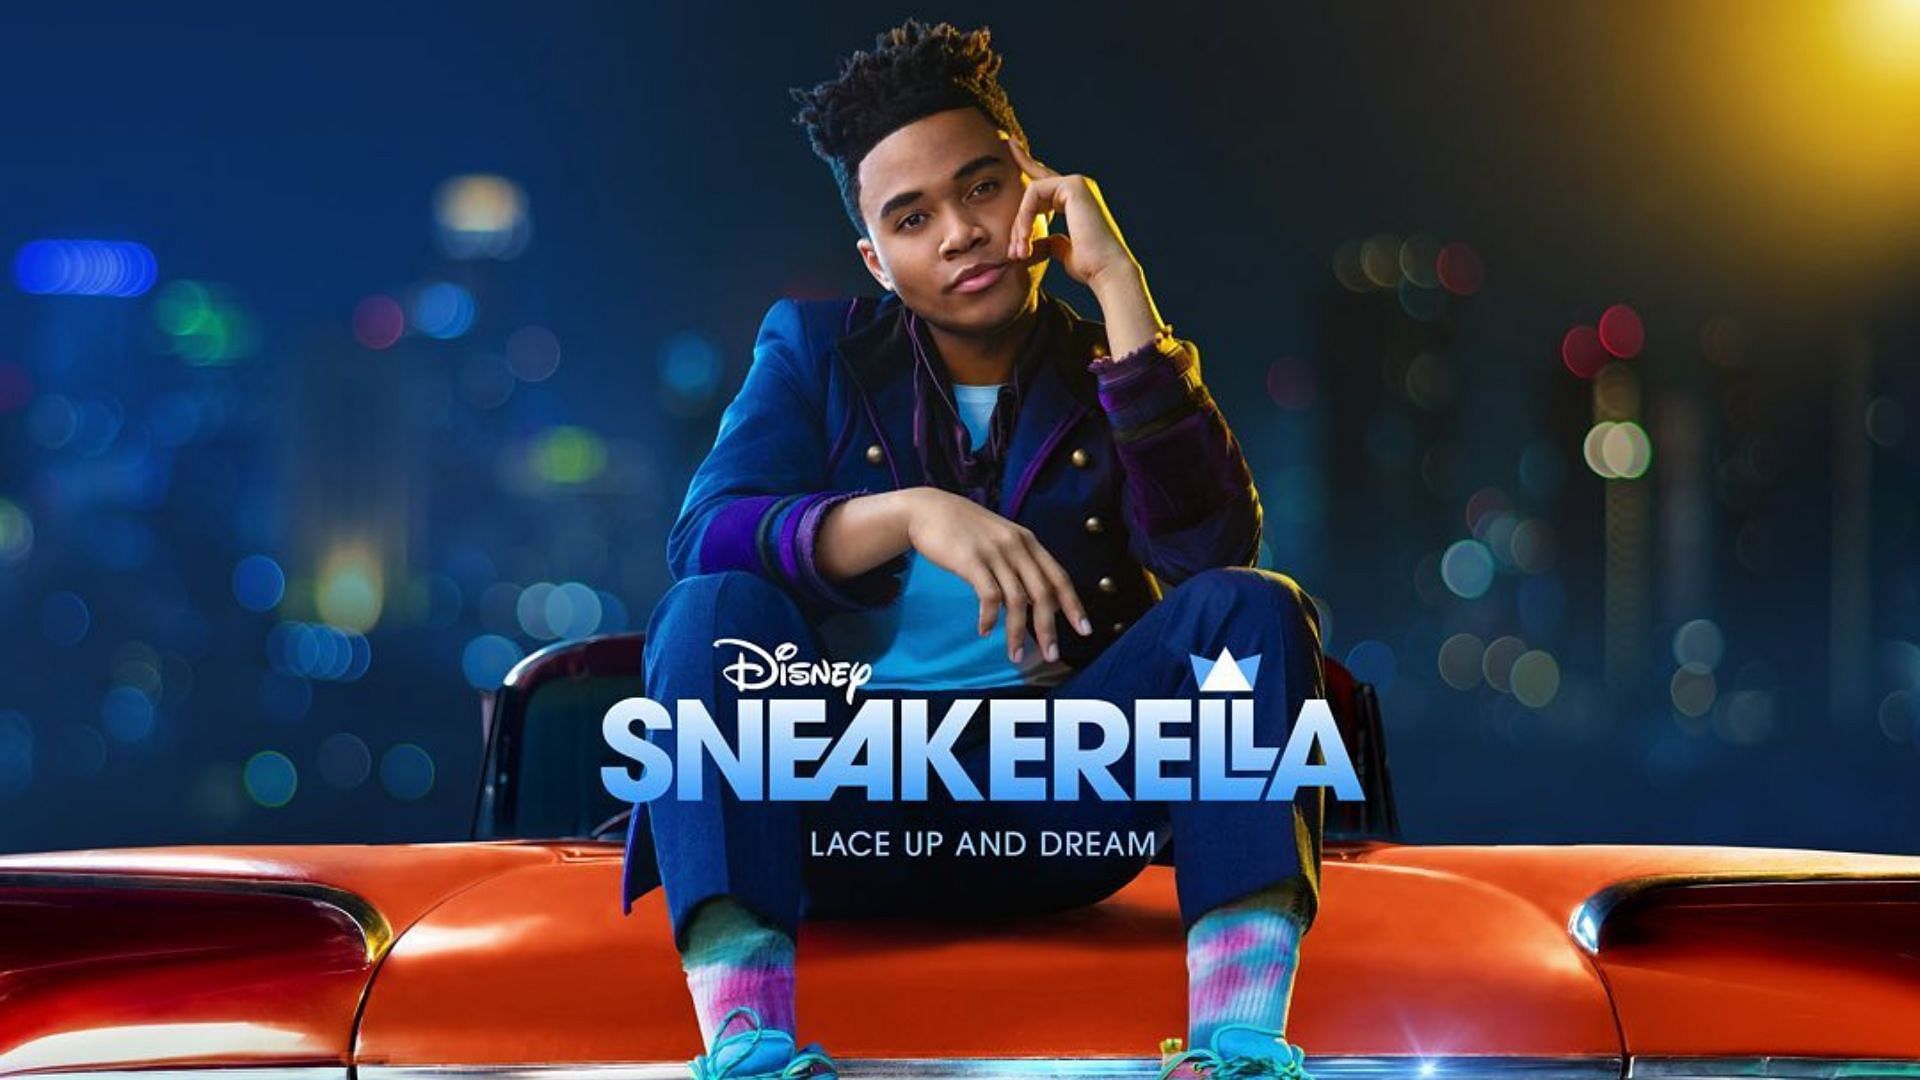 The promotional poster for Sneakerella, arriving this May 13, 2022, on Disney + (Image Via chosenjacobs/Instagram)